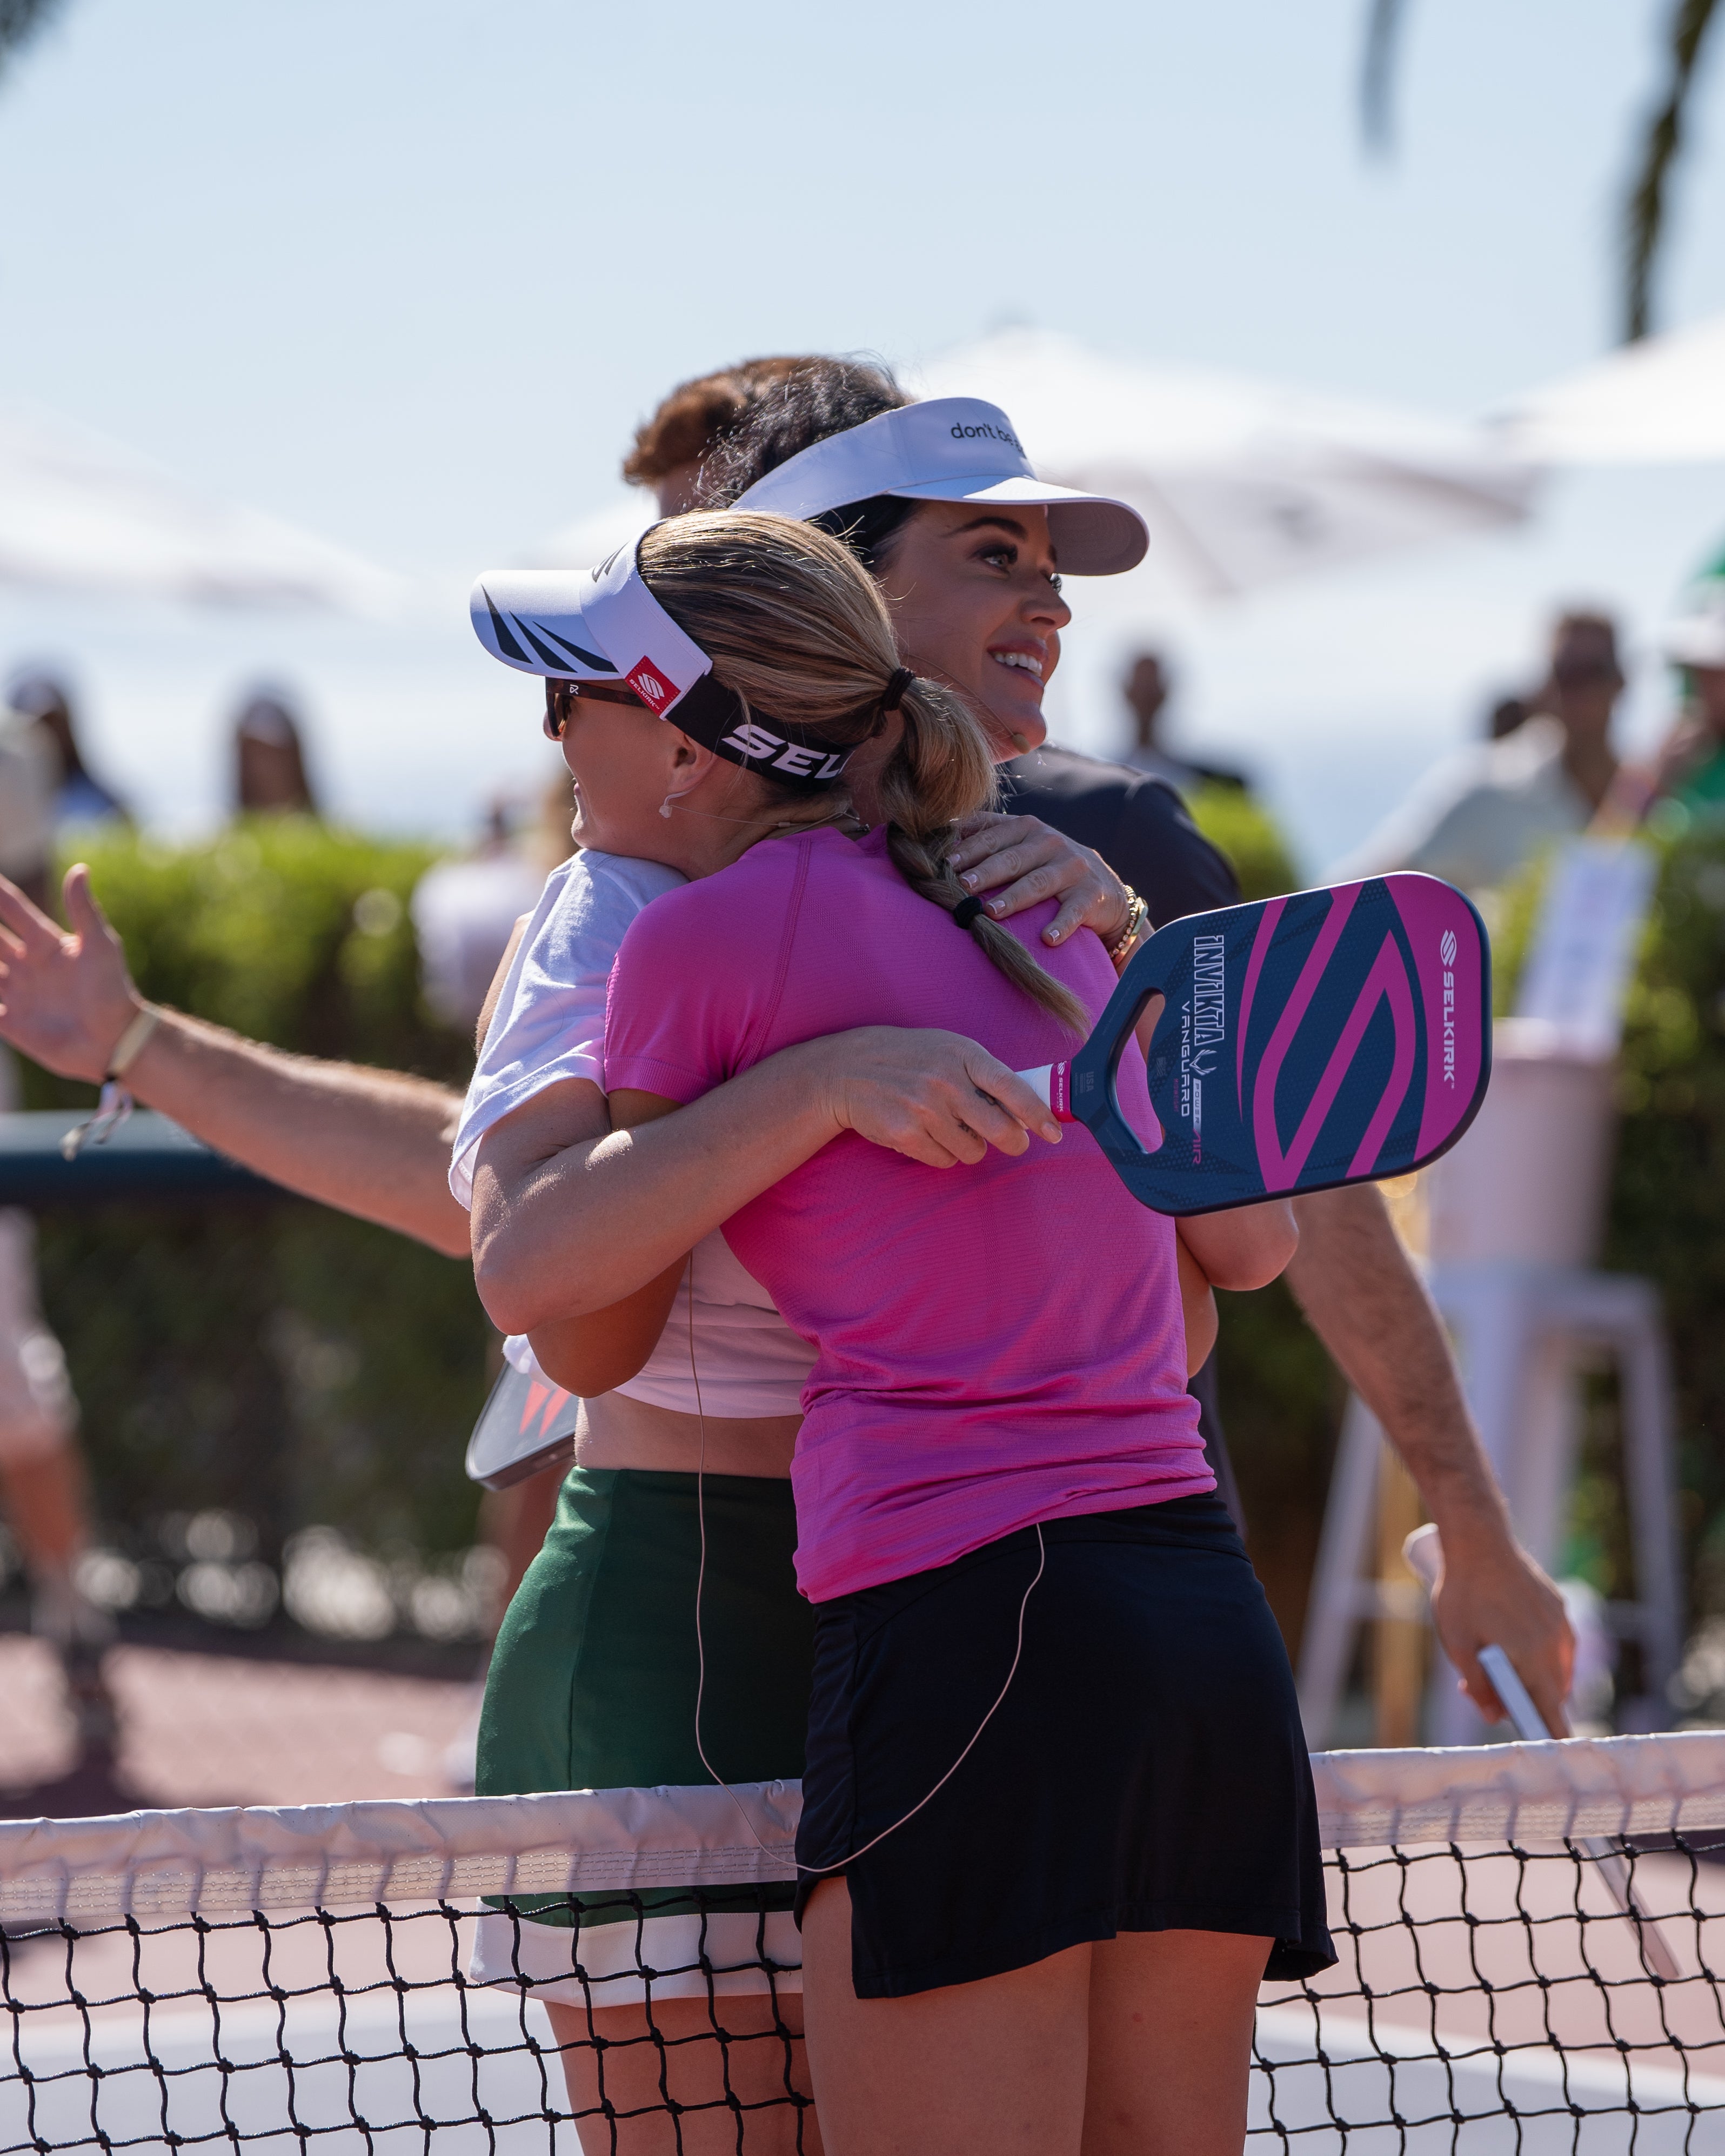 Selkirk Sport athlete Maggie Brascia hugs Katy Perry after playing an exhibition pickleball match